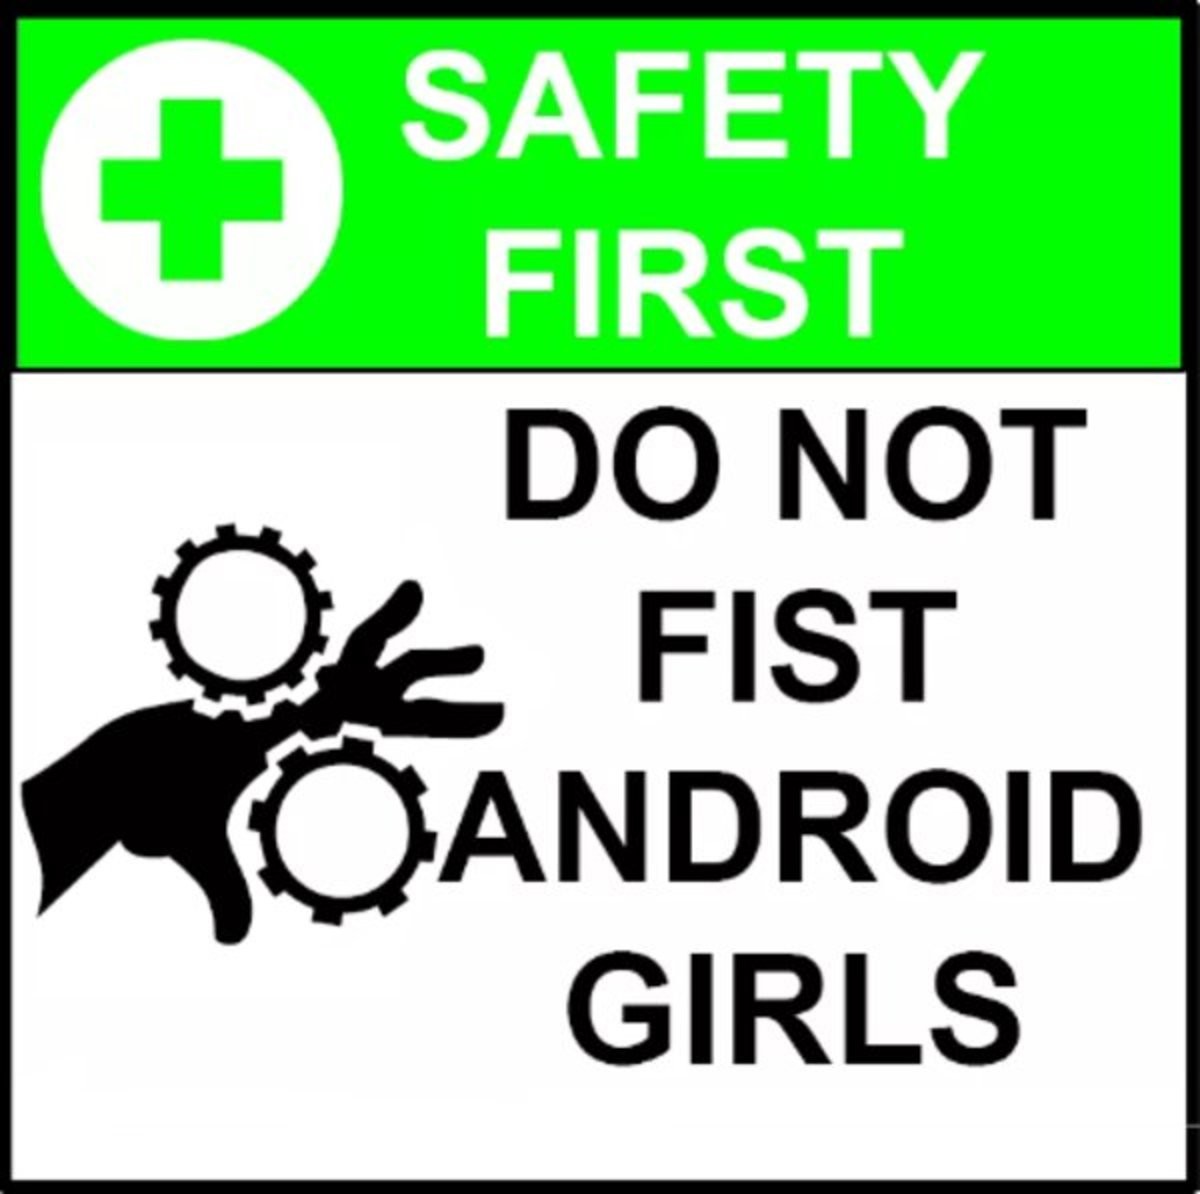 F ist. Dont first Android. Do not finger Android girls. Do not first Android girls. Do not first Android girls фото.